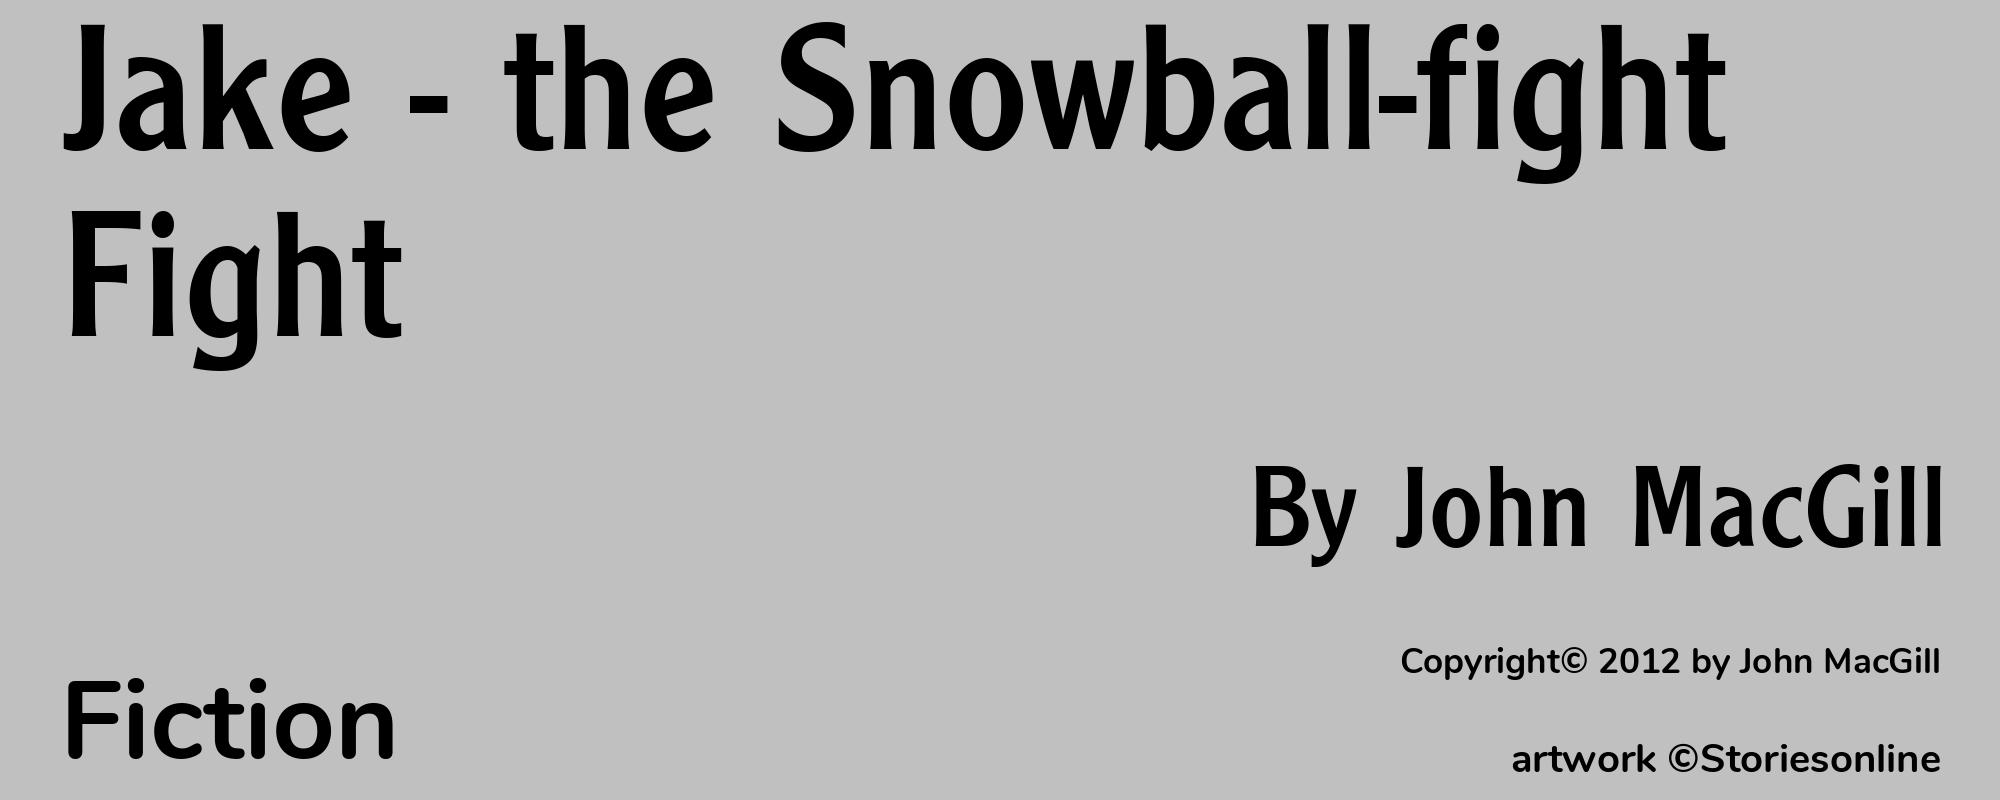 Jake - the Snowball-fight Fight - Cover